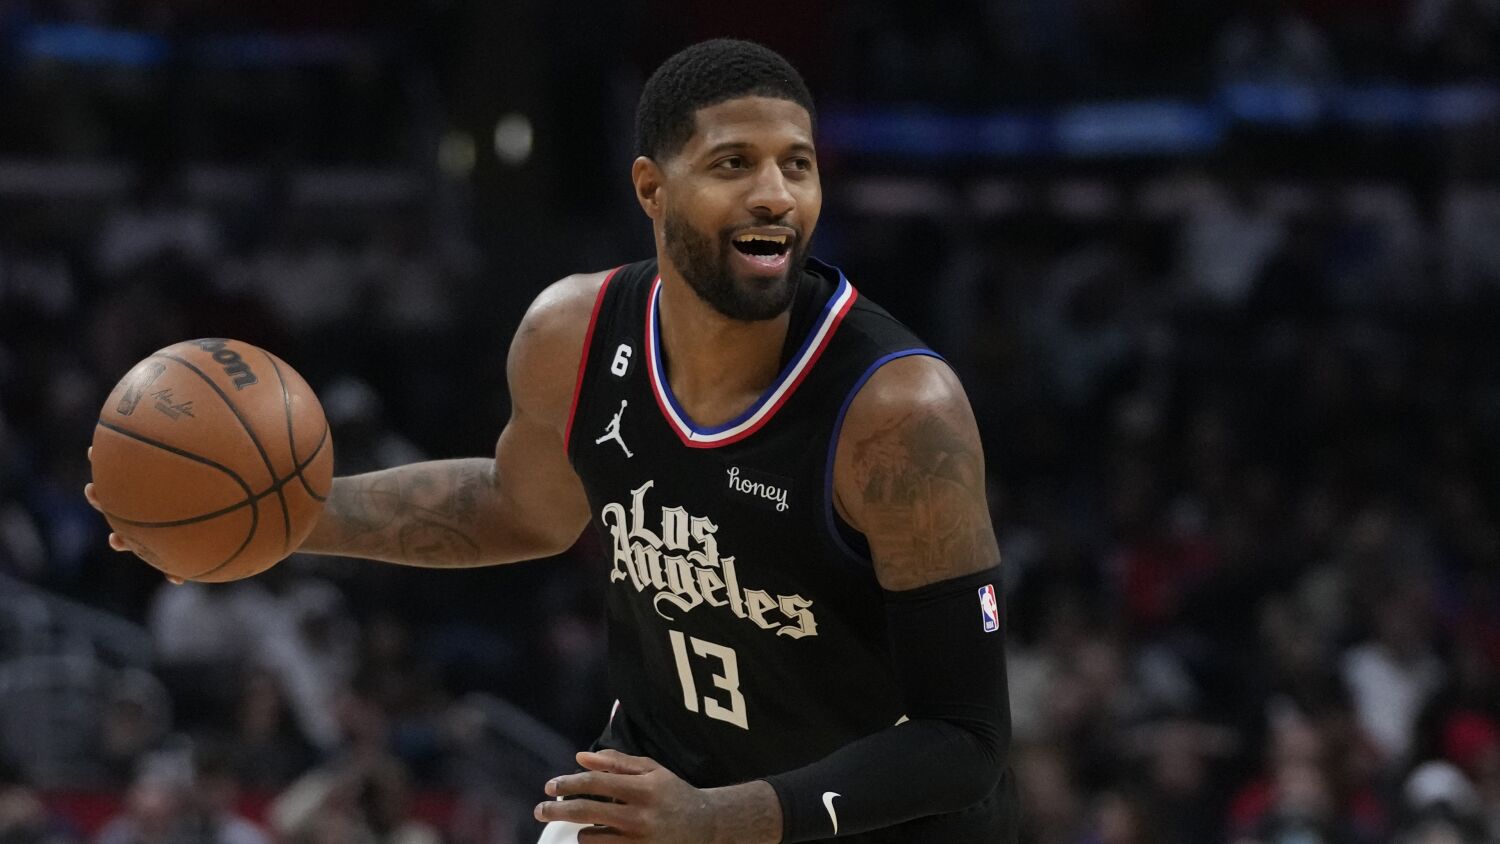 Clippers' Paul George: 'Attack rehab like it's practice'